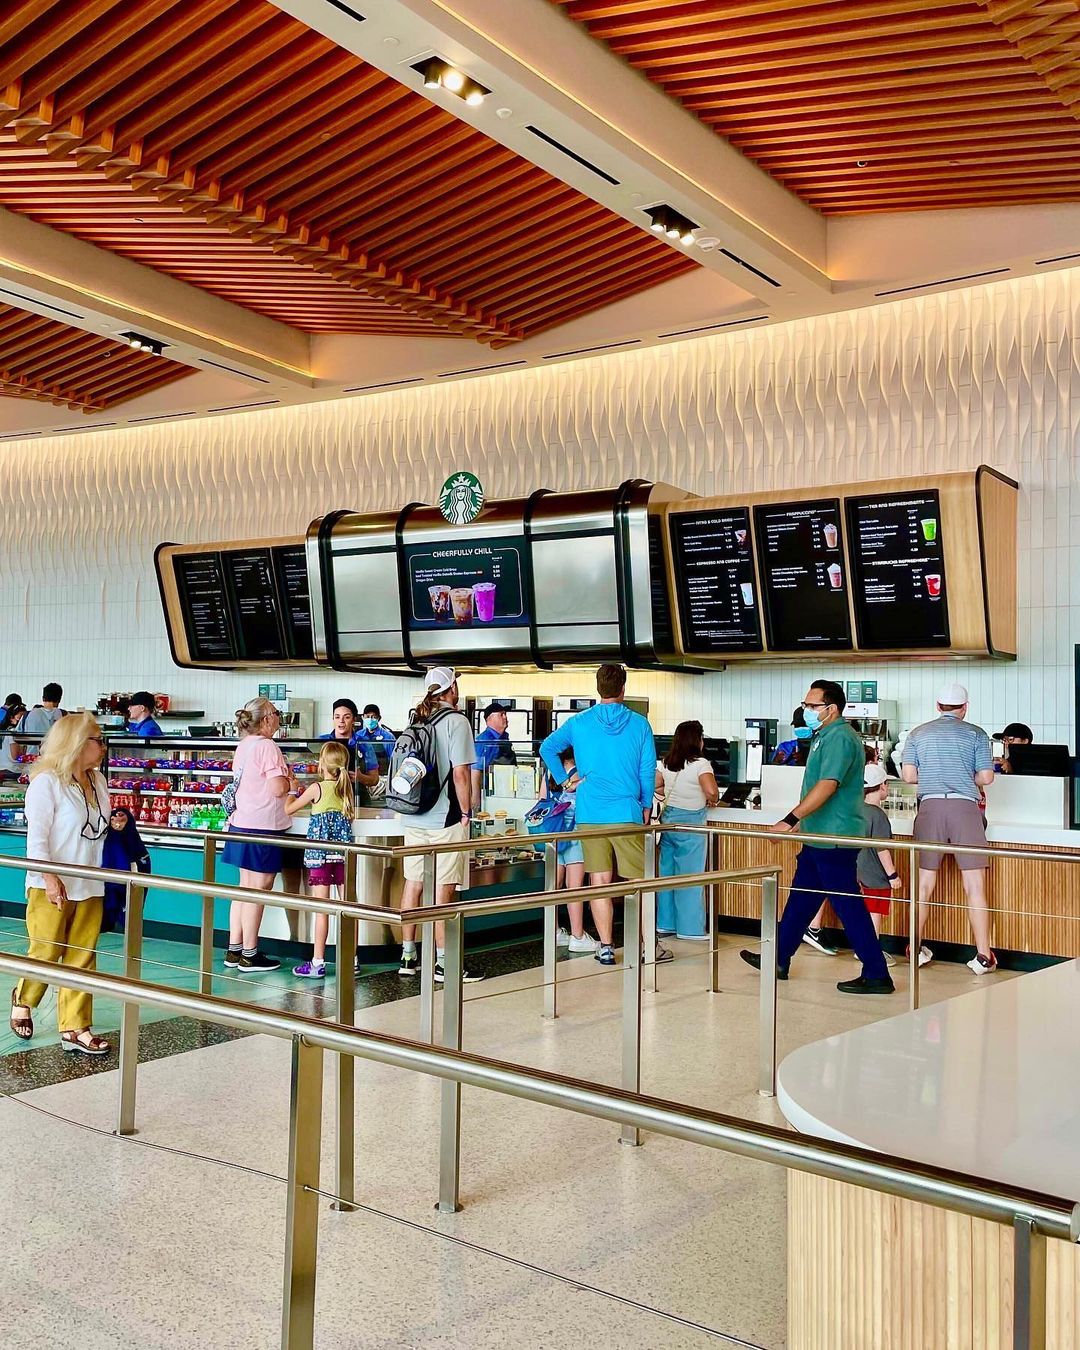 Connections Cafe - Starbucks at Epcot